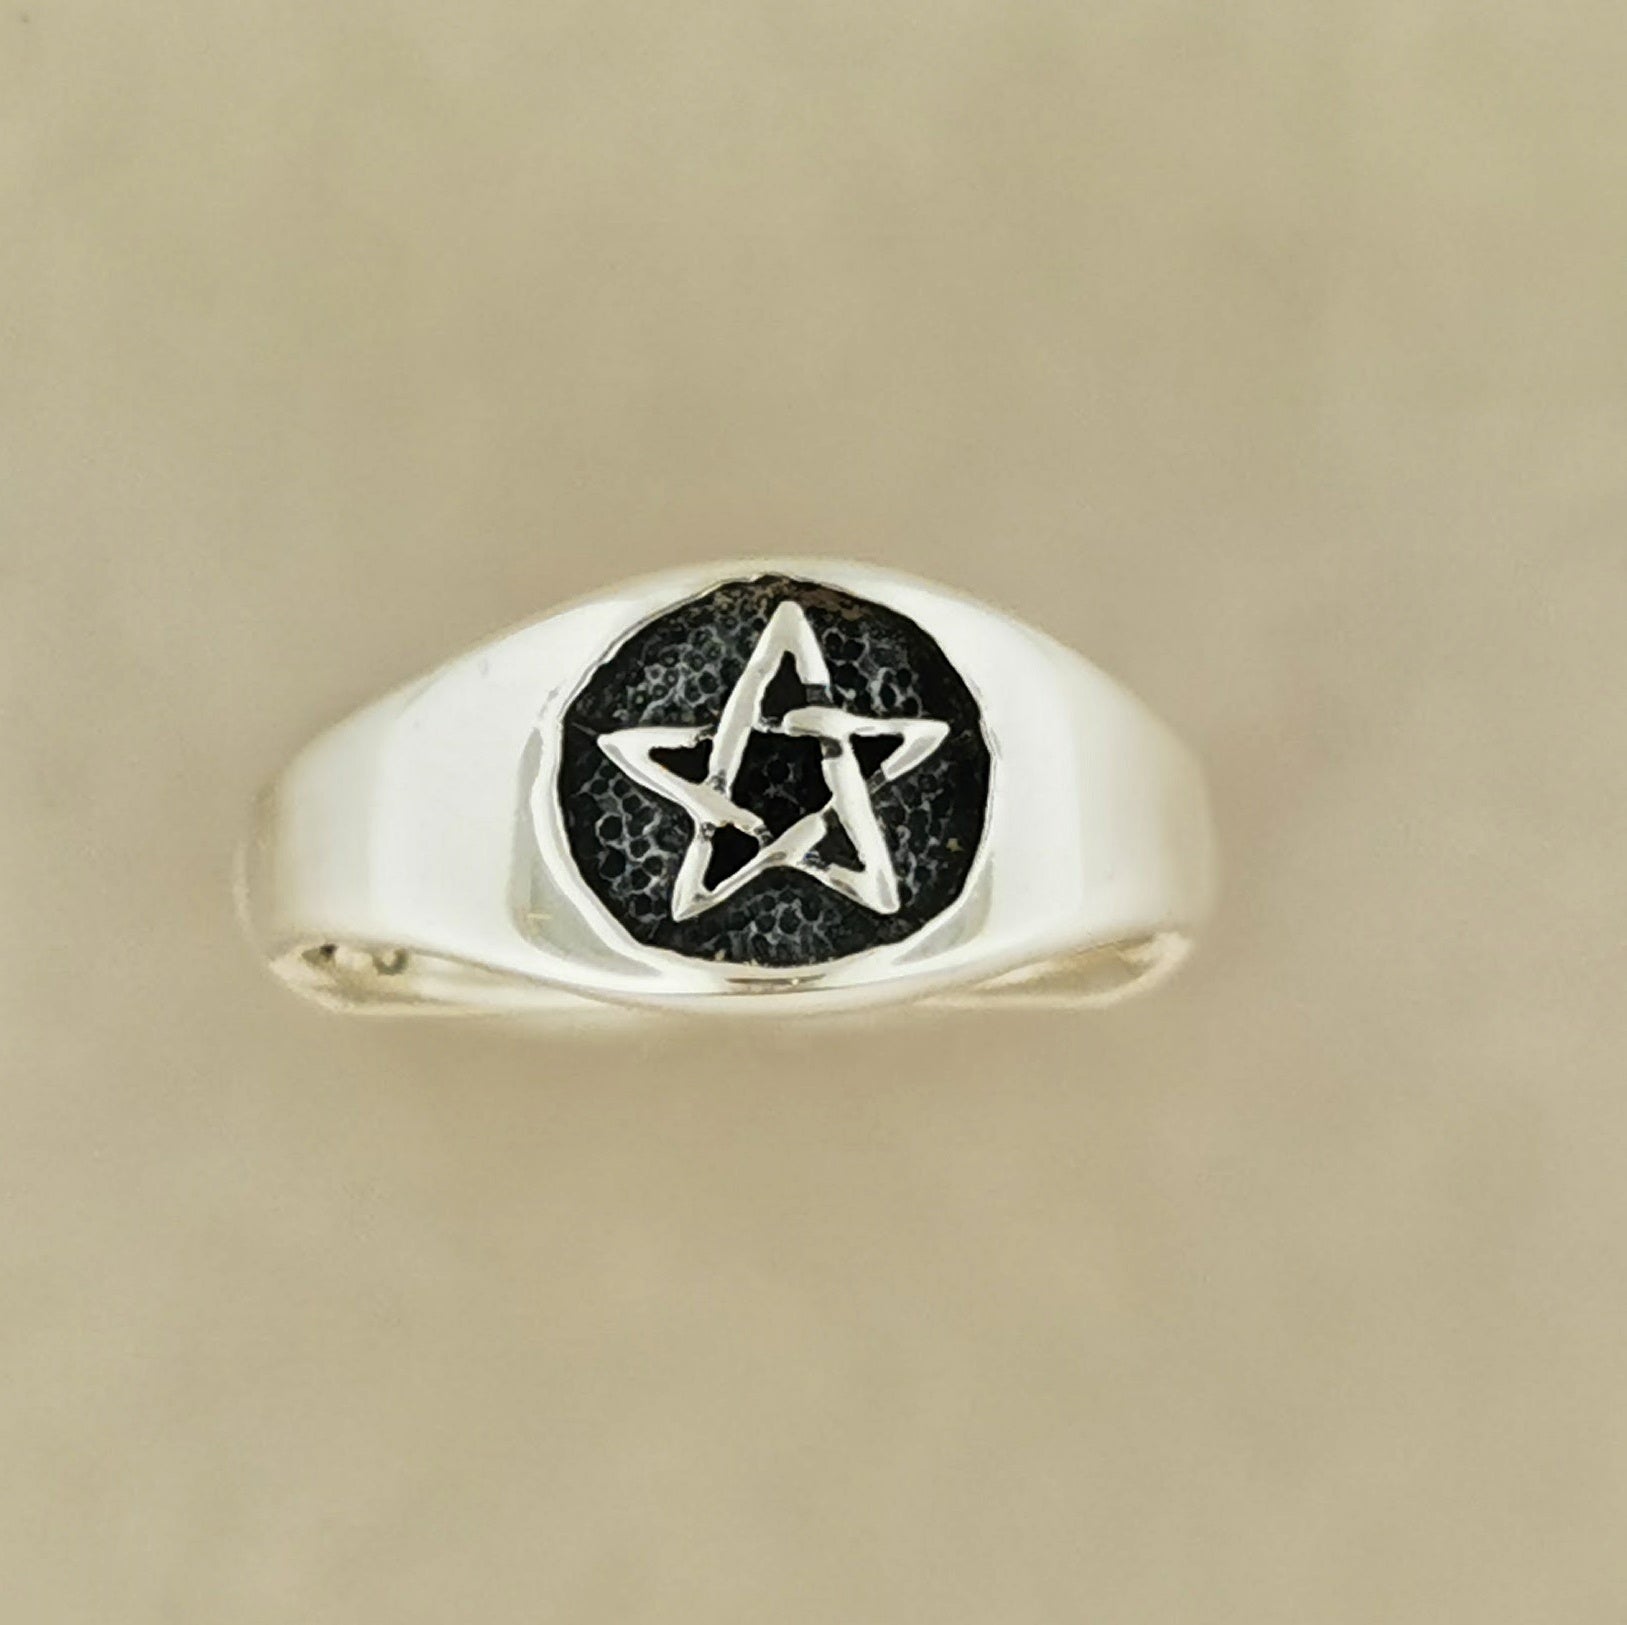 Ladies Pentacle Ring in Sterling Silver or Antique Bronze,  Silver Pentacle Ring, Bronze Pentacle Ring, Ladies Pentacle Ring, Silver Pagan Ring, Antique Bronze Pagan Ring, Silver Pagan Jewelry, Bronze Pagan Jewelry, Silver Wicca Ring, Bronze Wicca Ring, Silver Witch Ring, Bronze Witch Ring, Silver Star Ring, Bronze Star Ring